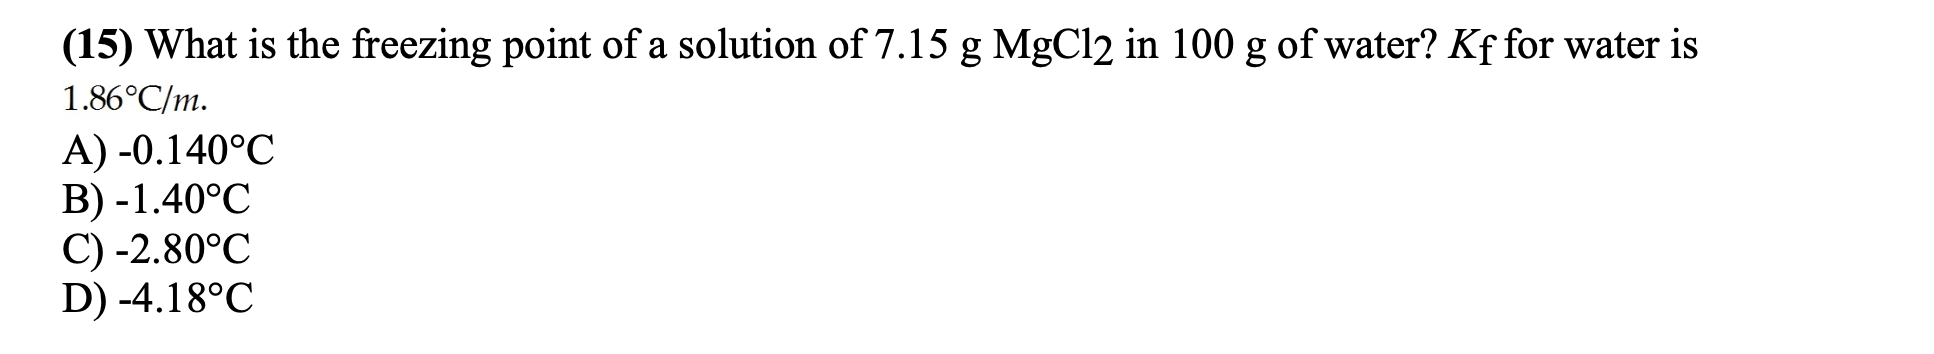 (15) What is the freezing point of a solution of 7.15 g MgCl2 in 100 g of water? Kf for water is
1.86°C/m.
A) -0.140°C
B) -1.40°C
C) -2.80°C
D) -4.18°C
